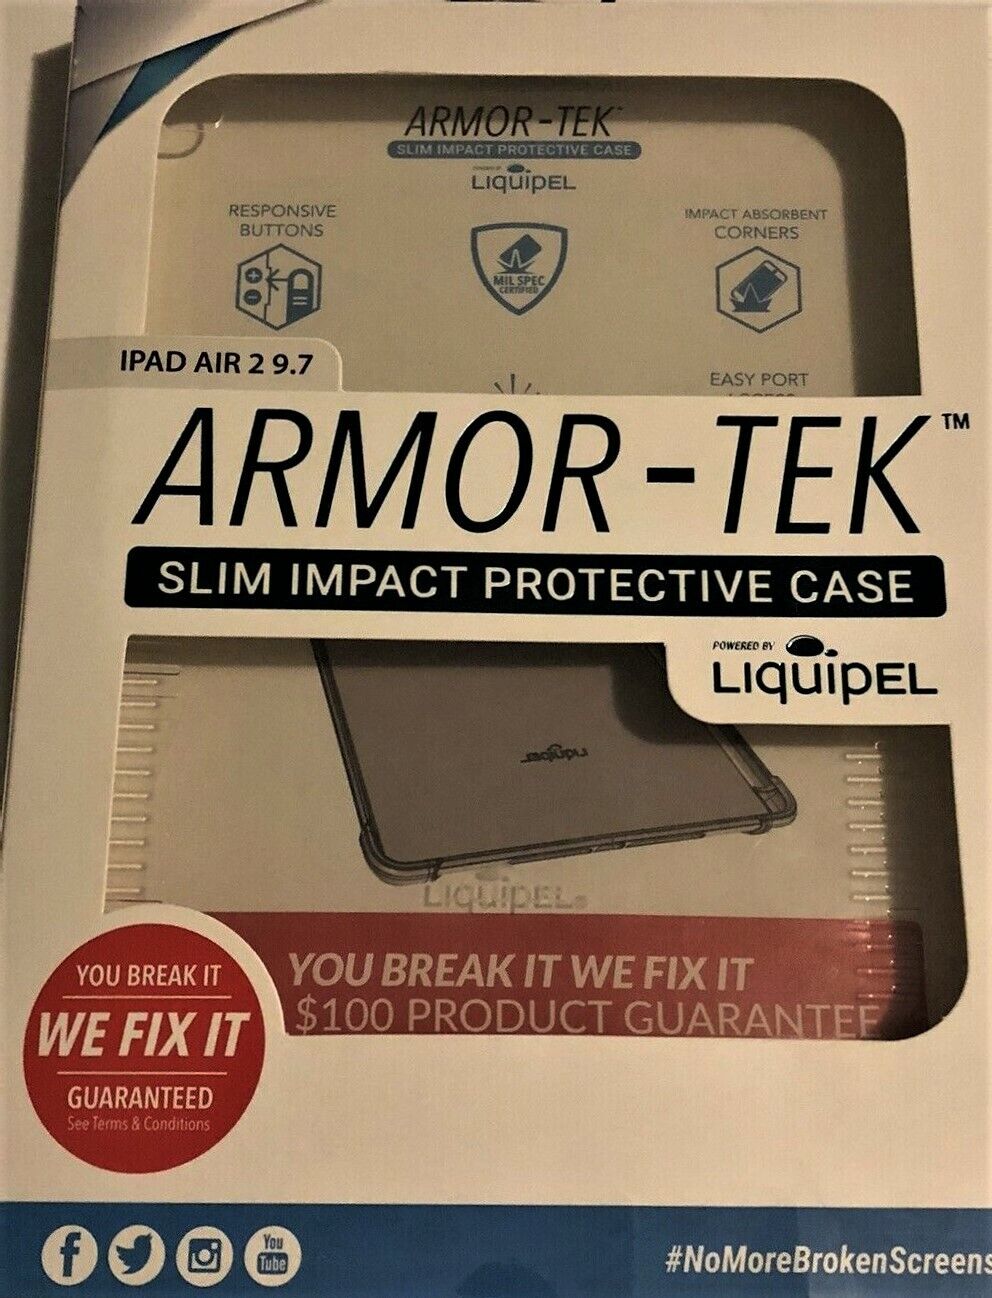 Armor-Tek Slim Impact Protective Clear Case for Ipad Air 2 9.7 New in Box